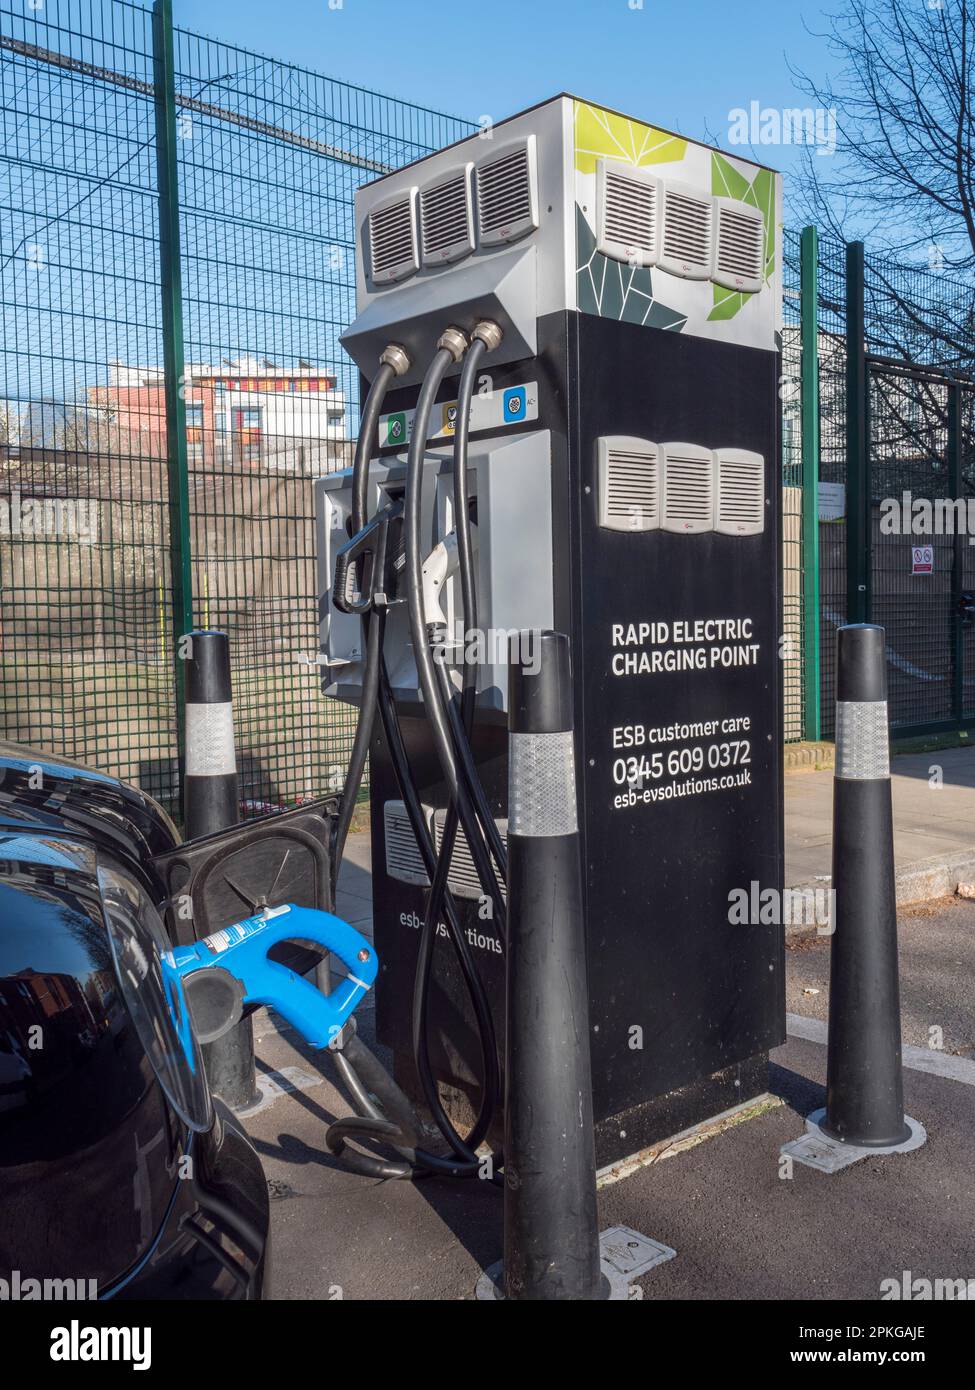 An electric car on charge at an ESB rapid electric charging point, Gloucester Way, London, UK. Stock Photo